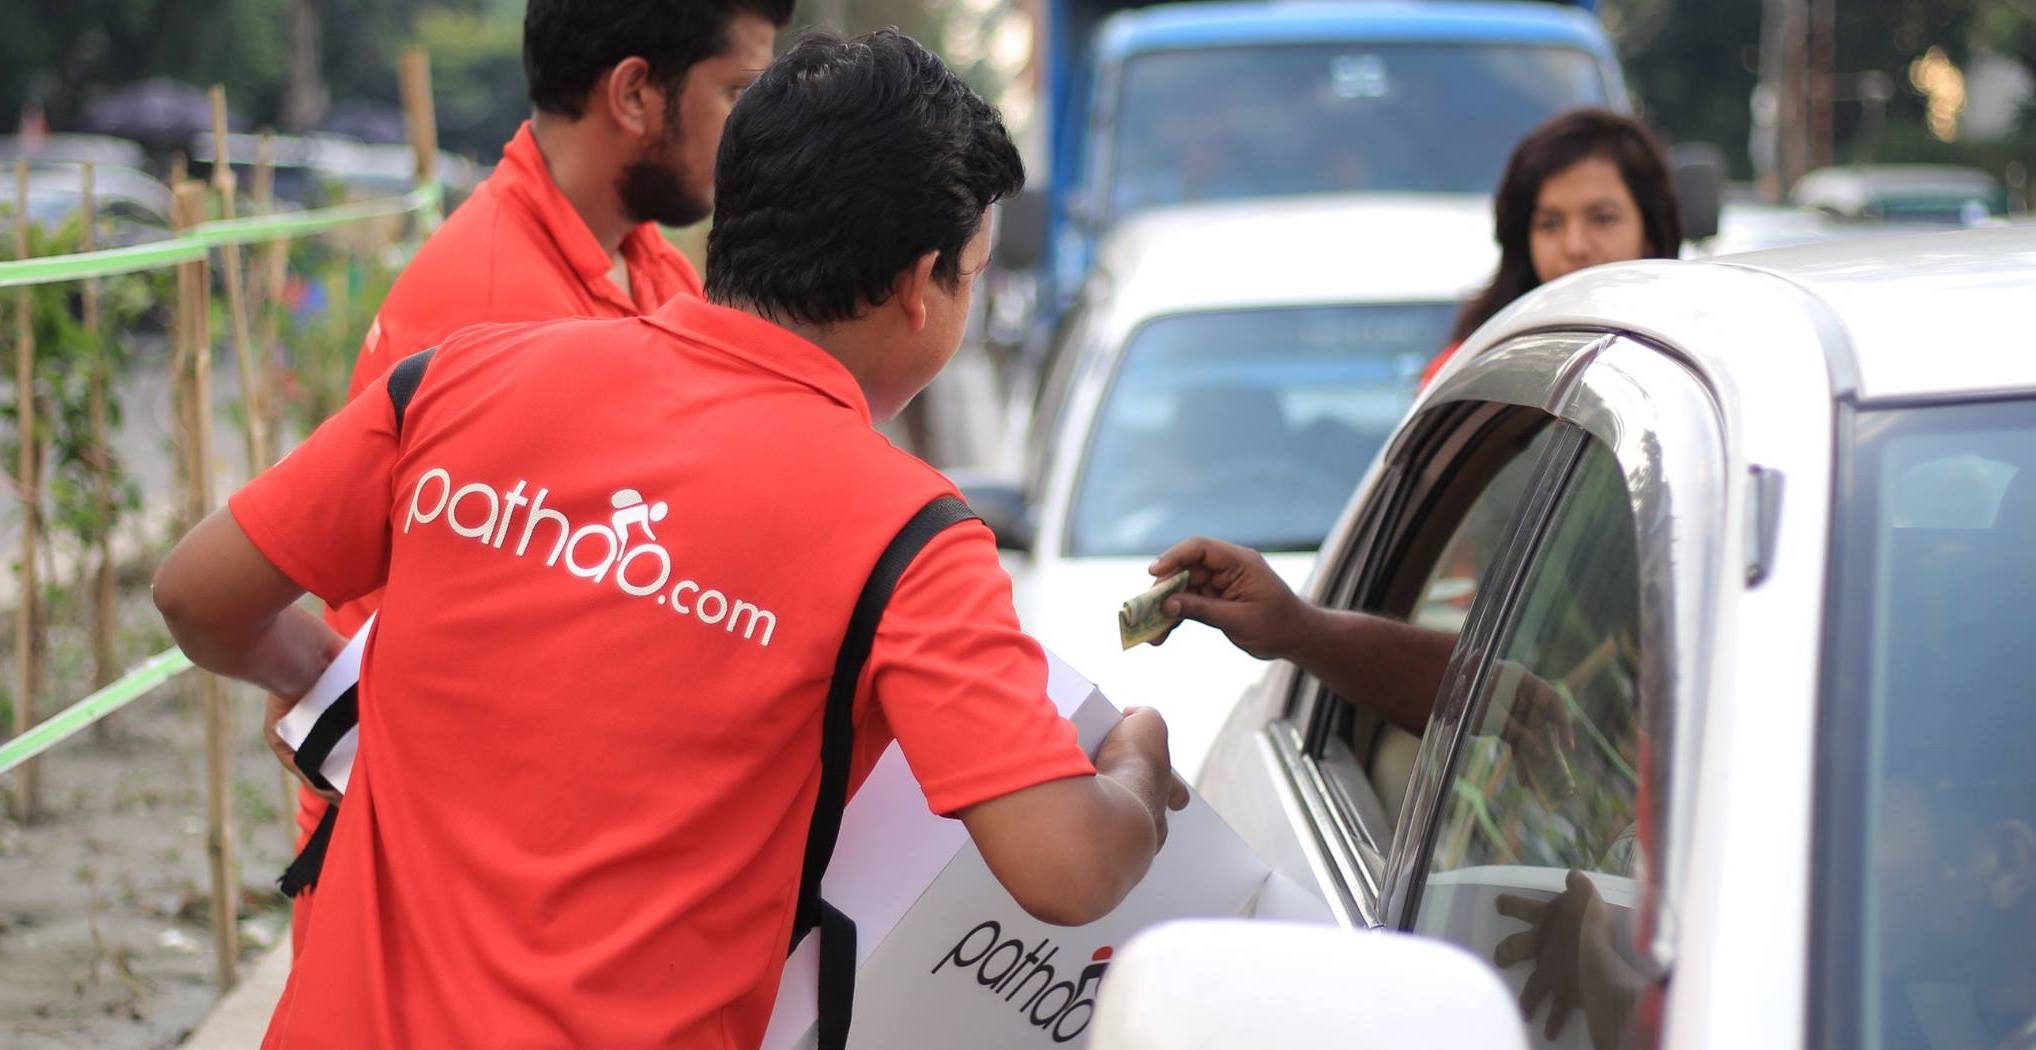 Bangladesh's Pathao raises pre-Series B funding from Go-Jek, others at $100m valuation